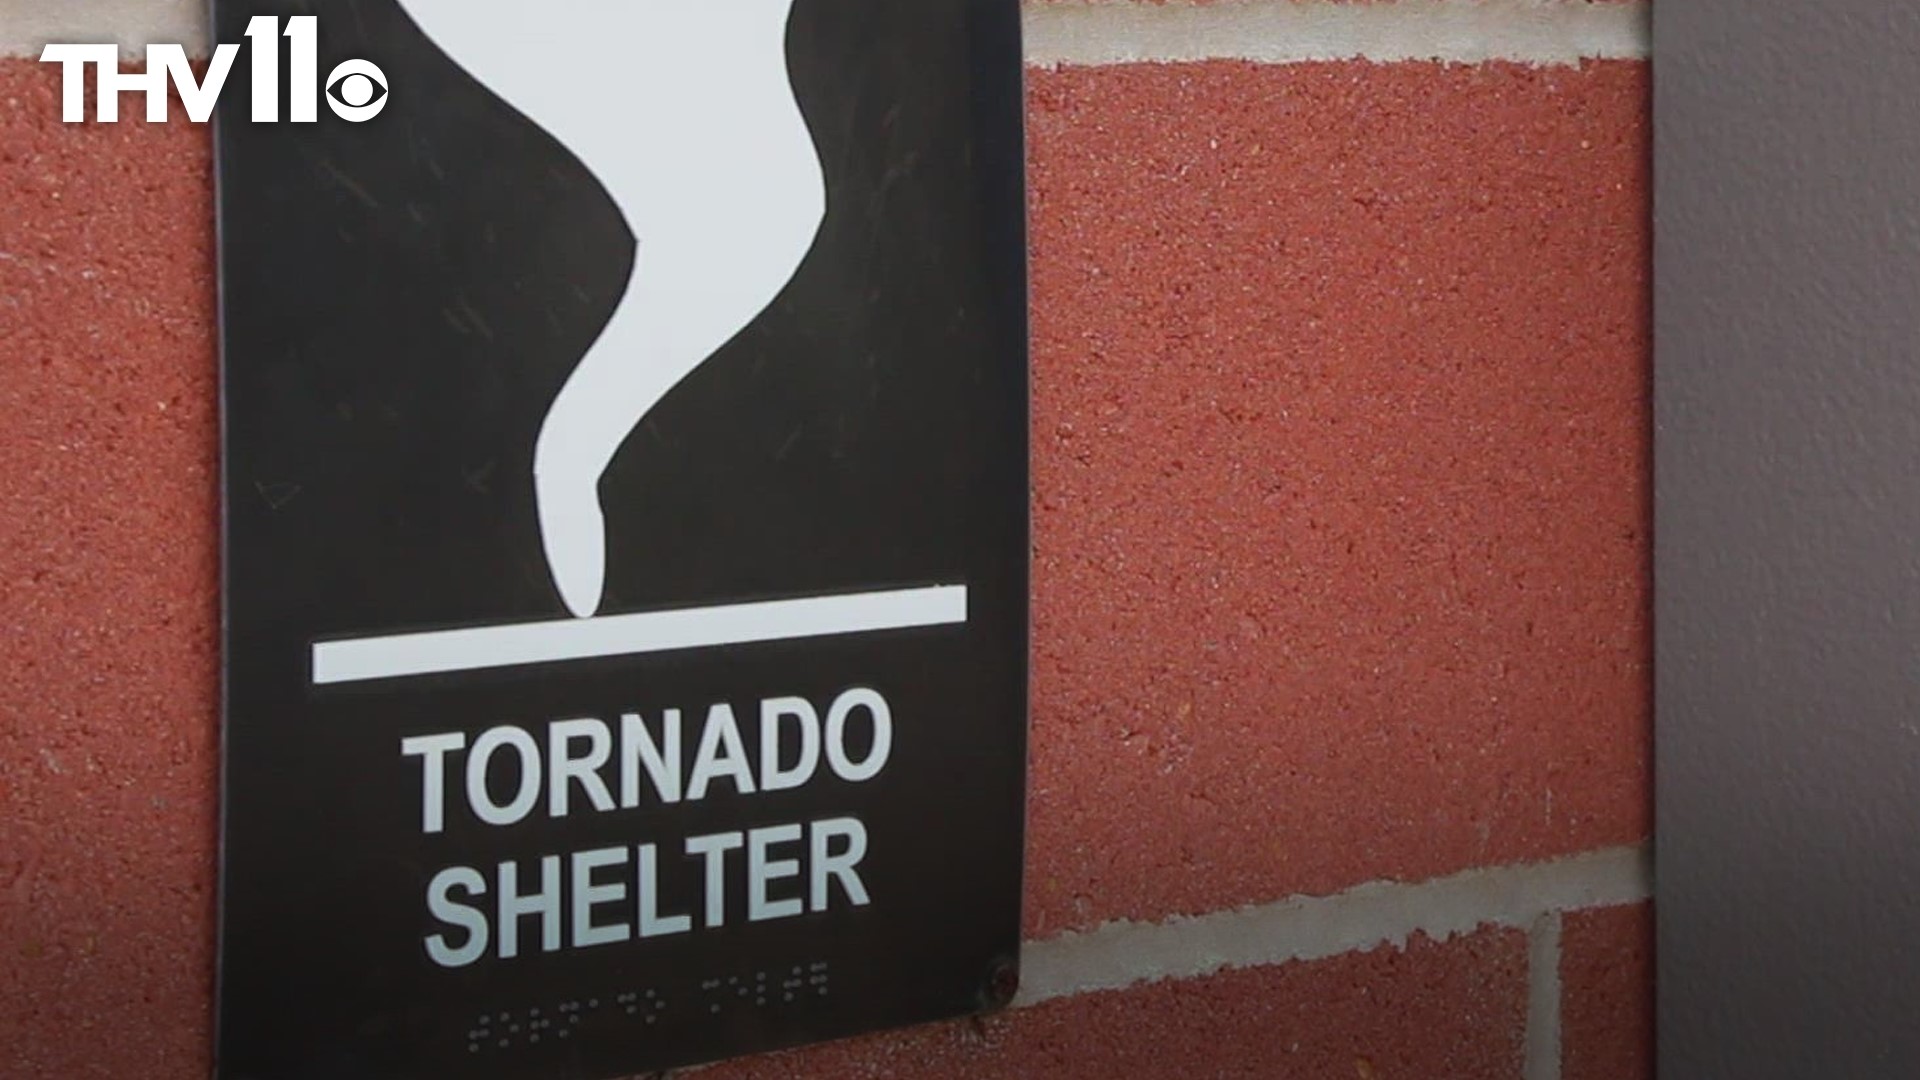 Tornado shelters are something we don't think about until it's time to use them. So, how does it work and when do they open for the public?